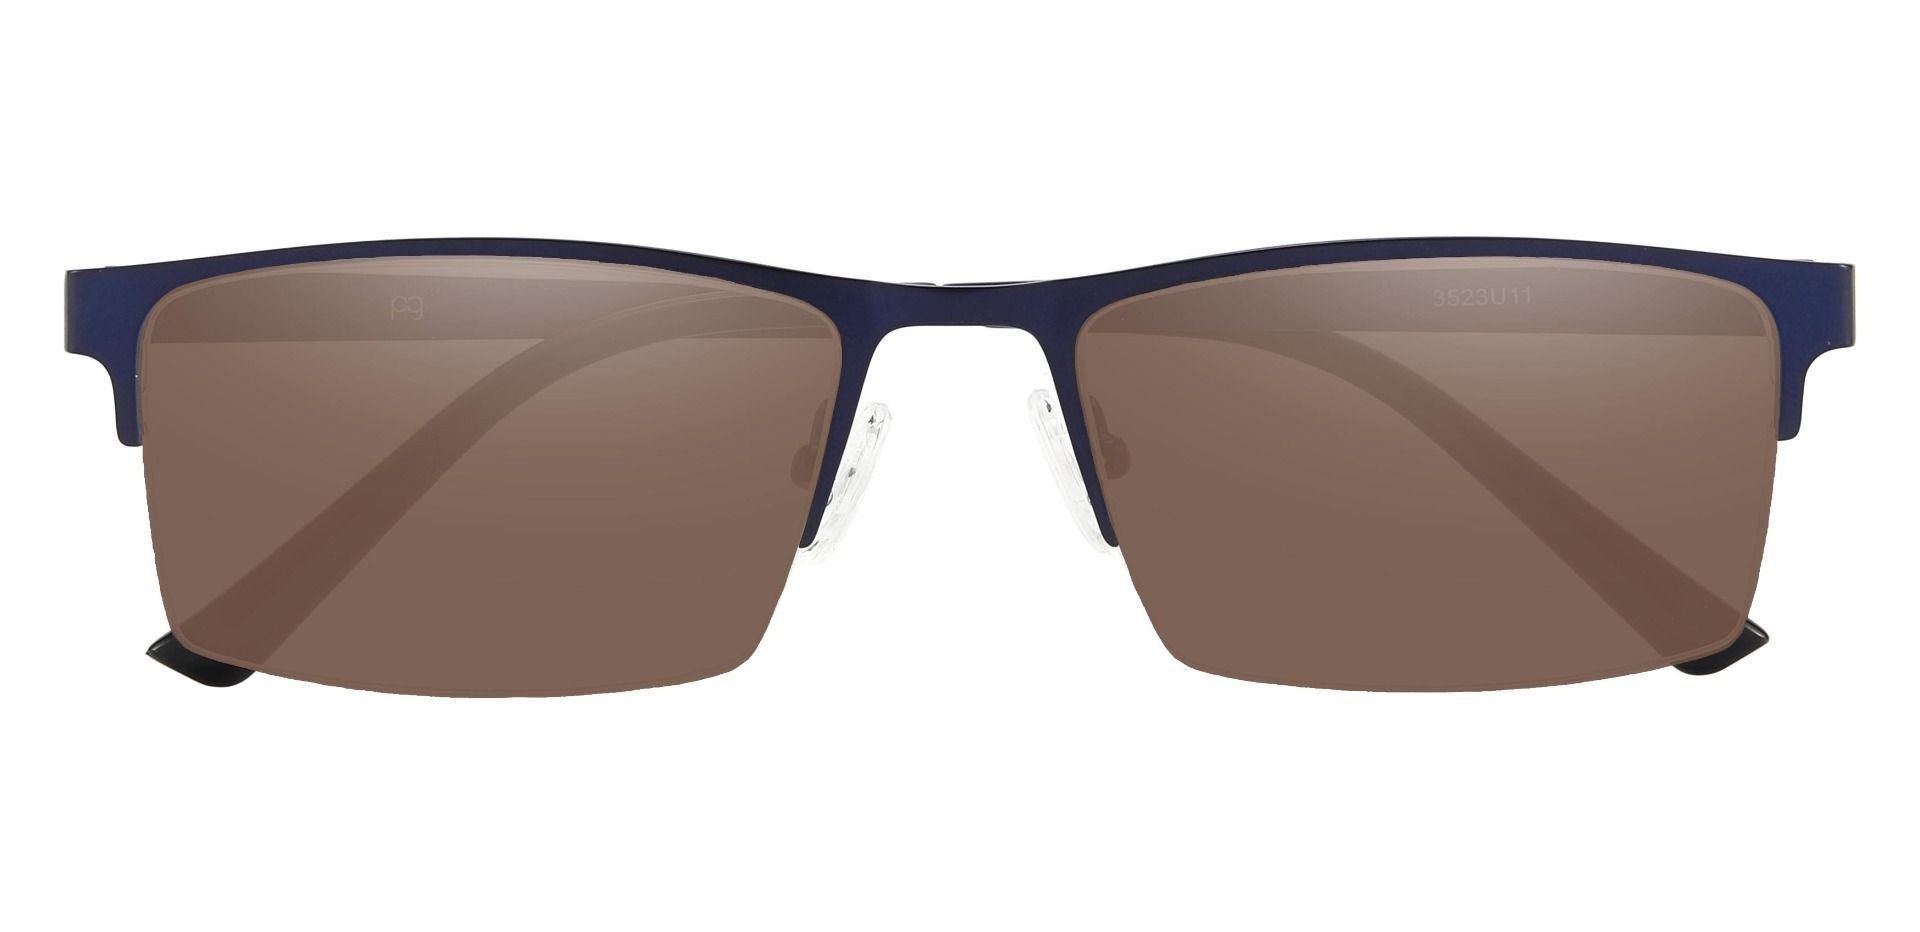 Patrick Rectangle Lined Bifocal Sunglasses - Blue Frame With Brown Lenses